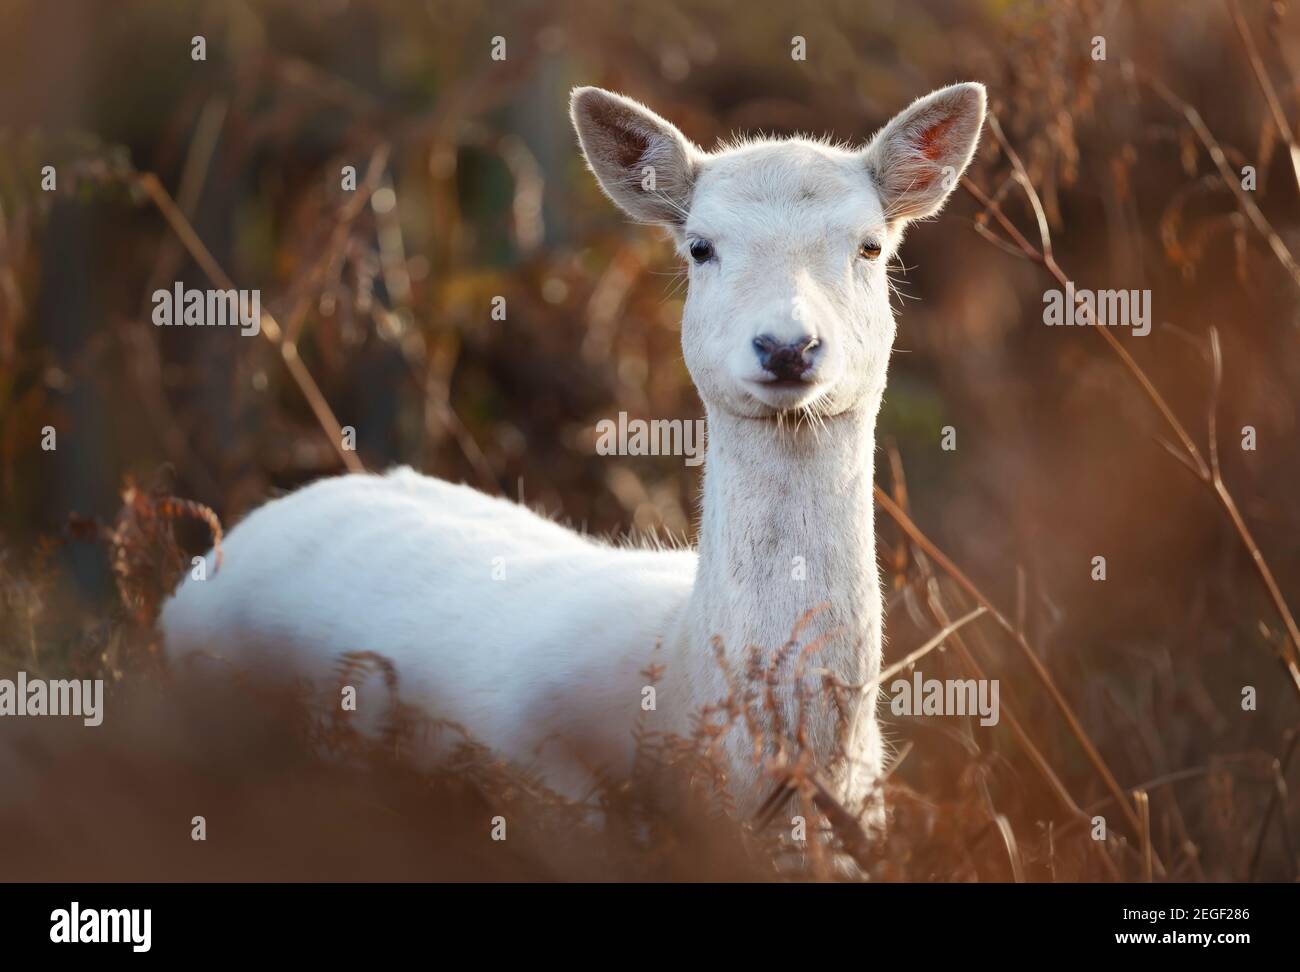 Close up of a white Fallow deer (Dama dama) standing in tall grass in autumn, UK. Stock Photo